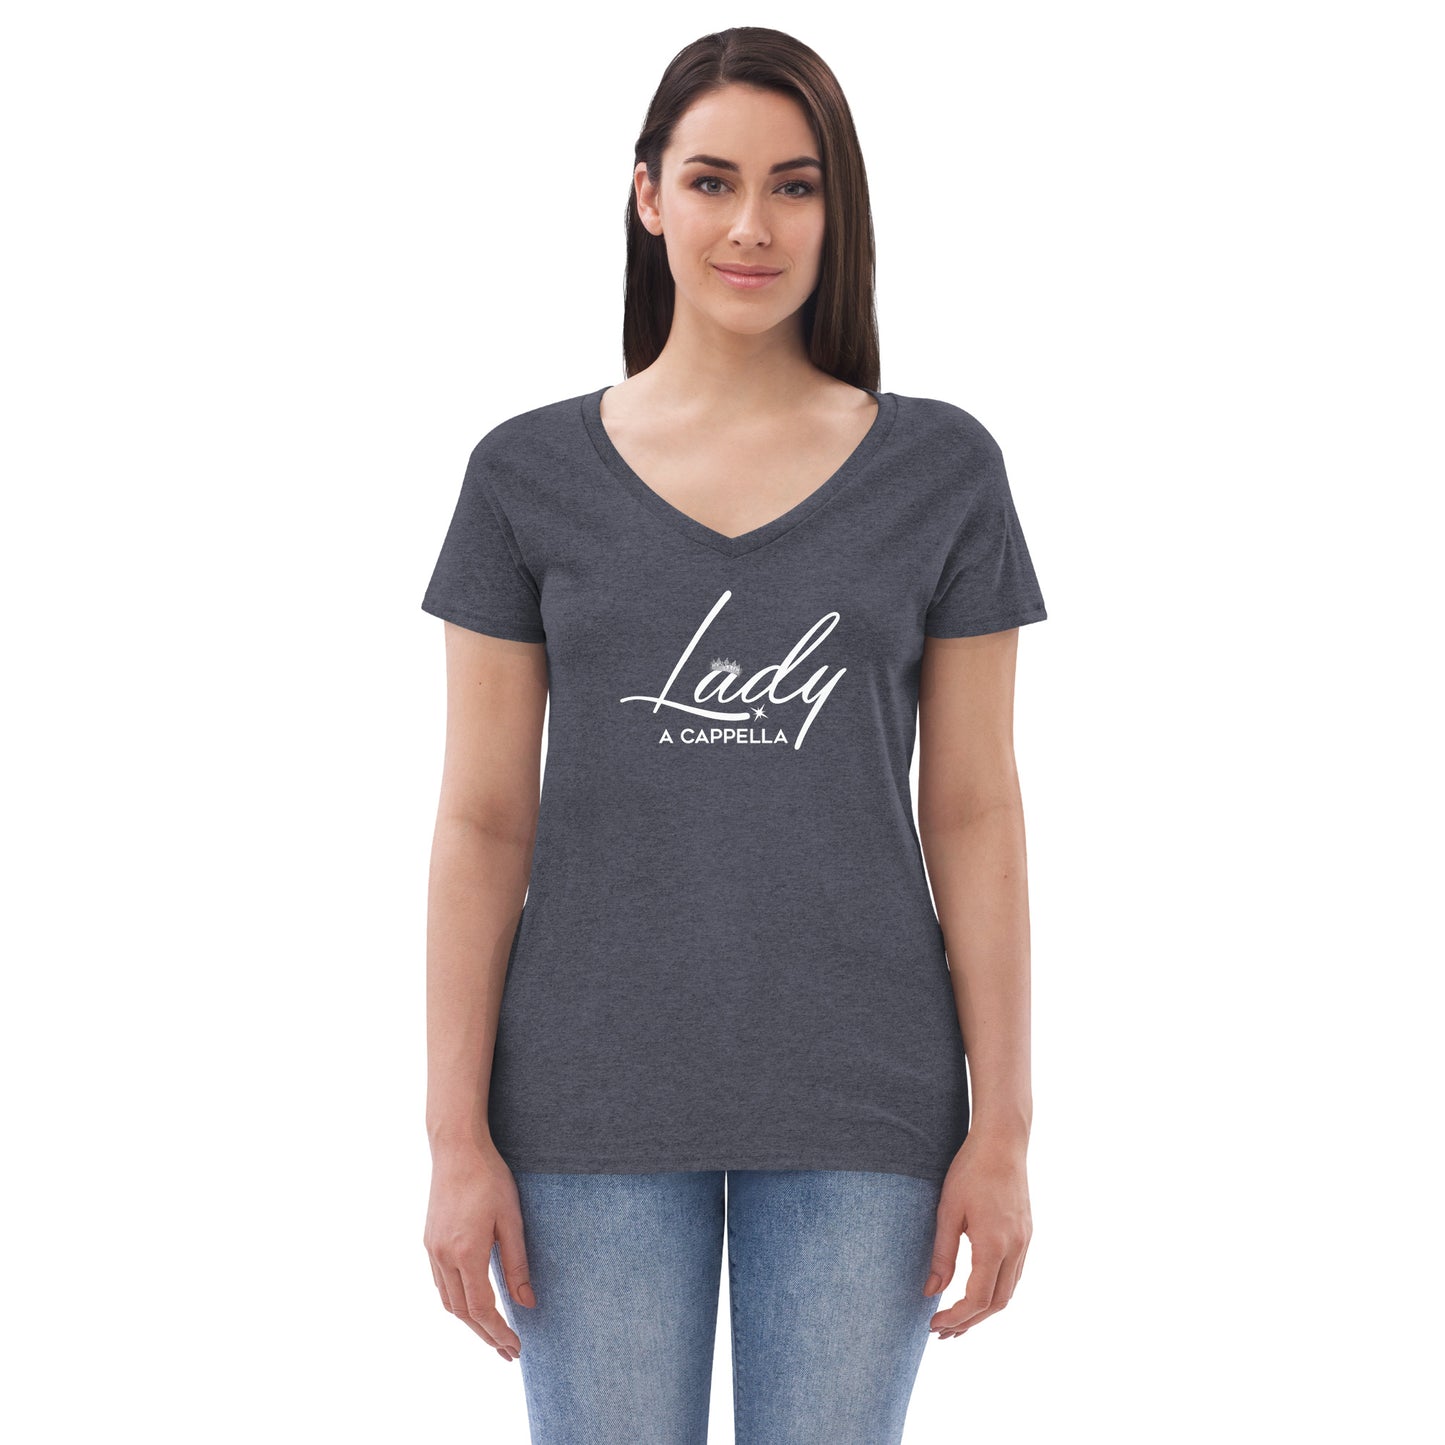 Lady A Cappella - Women’s recycled v-neck t-shirt